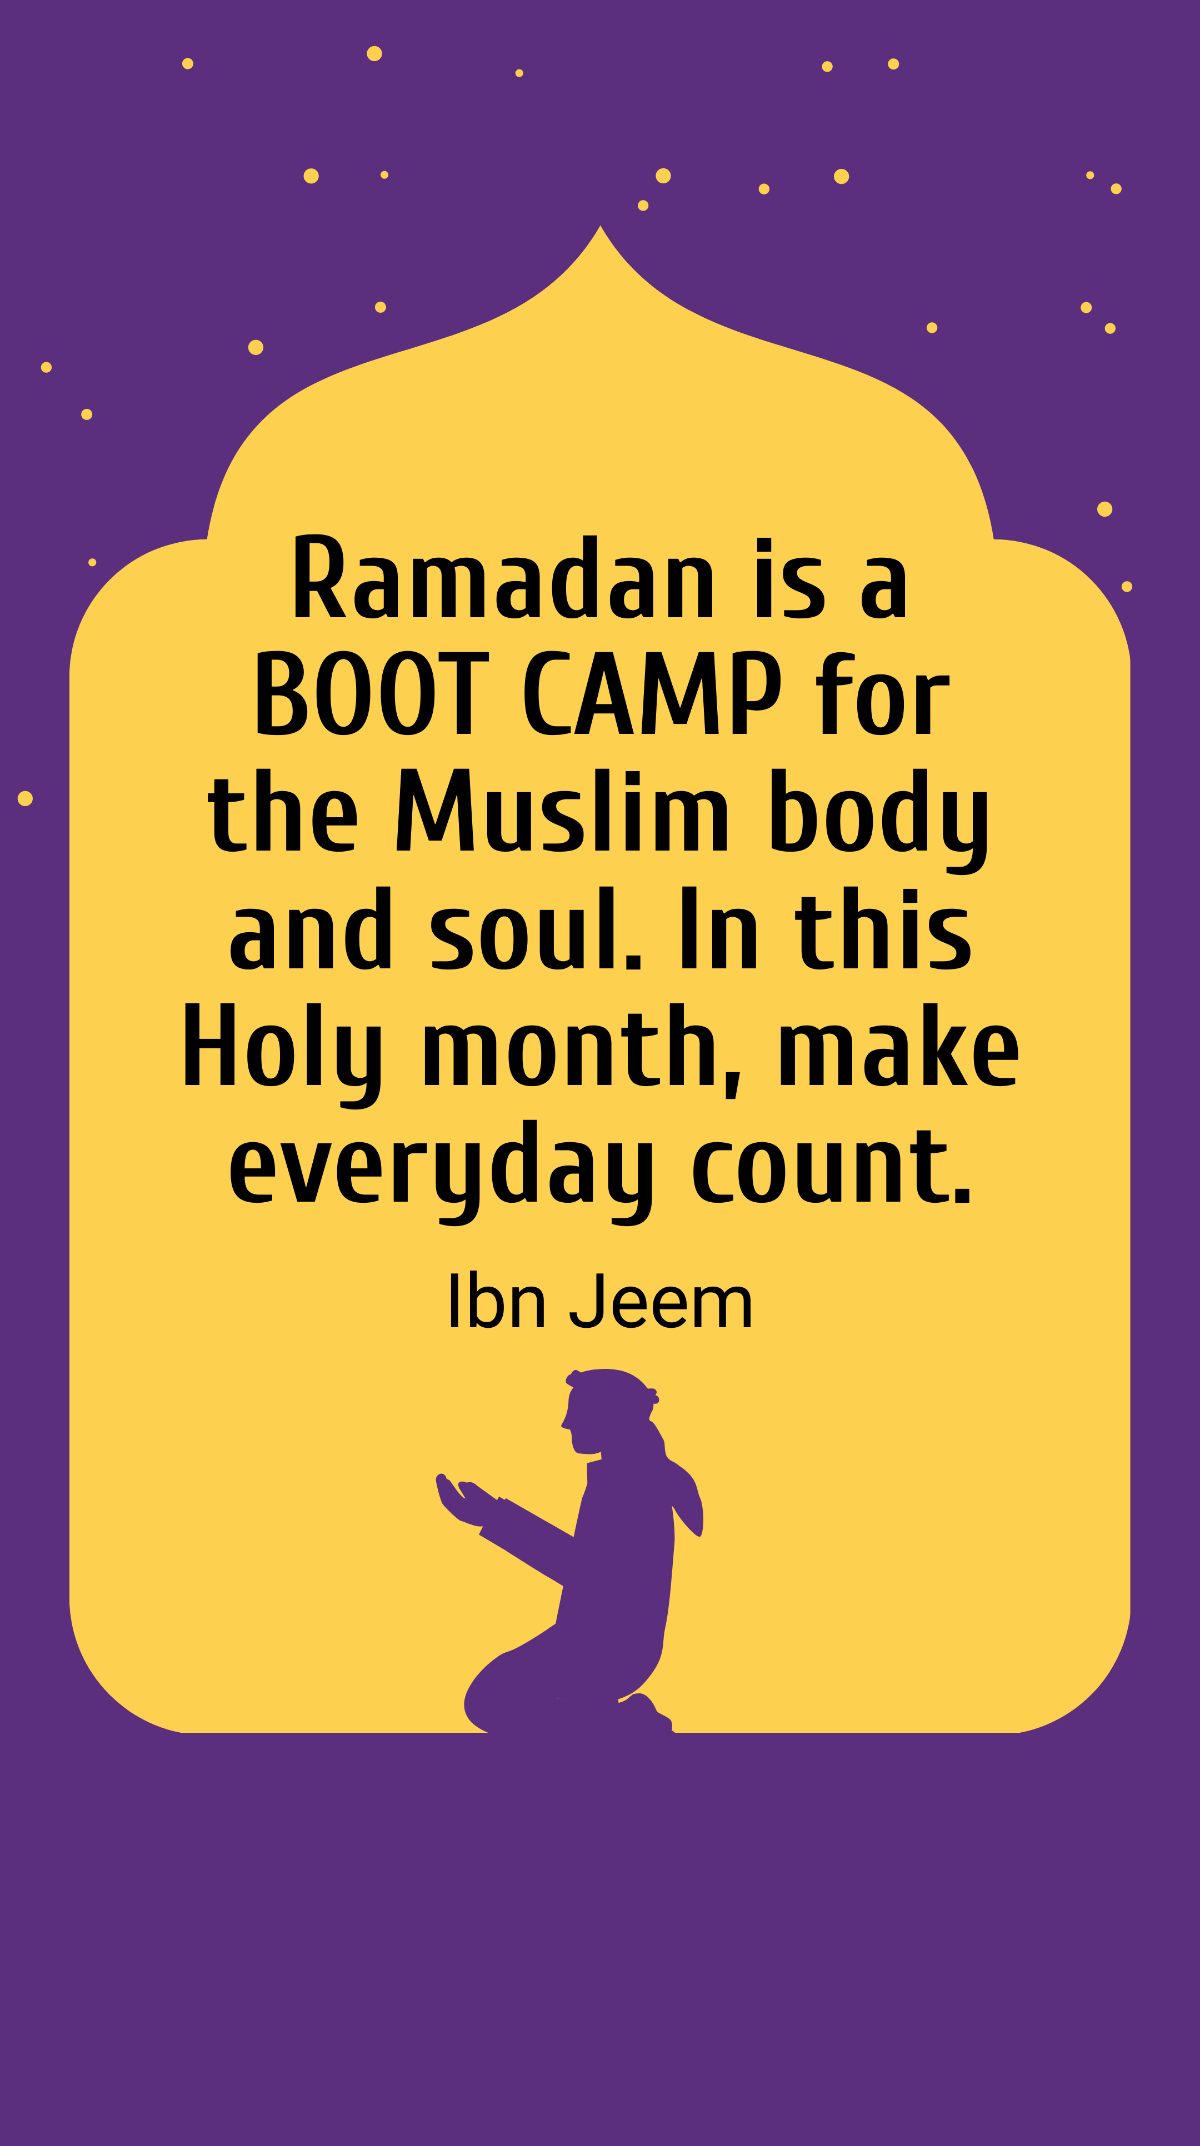 Ibn Jeem - Ramadan is a BOOT CAMP for the Muslim body and soul. In this Holy month, make everyday count. Template